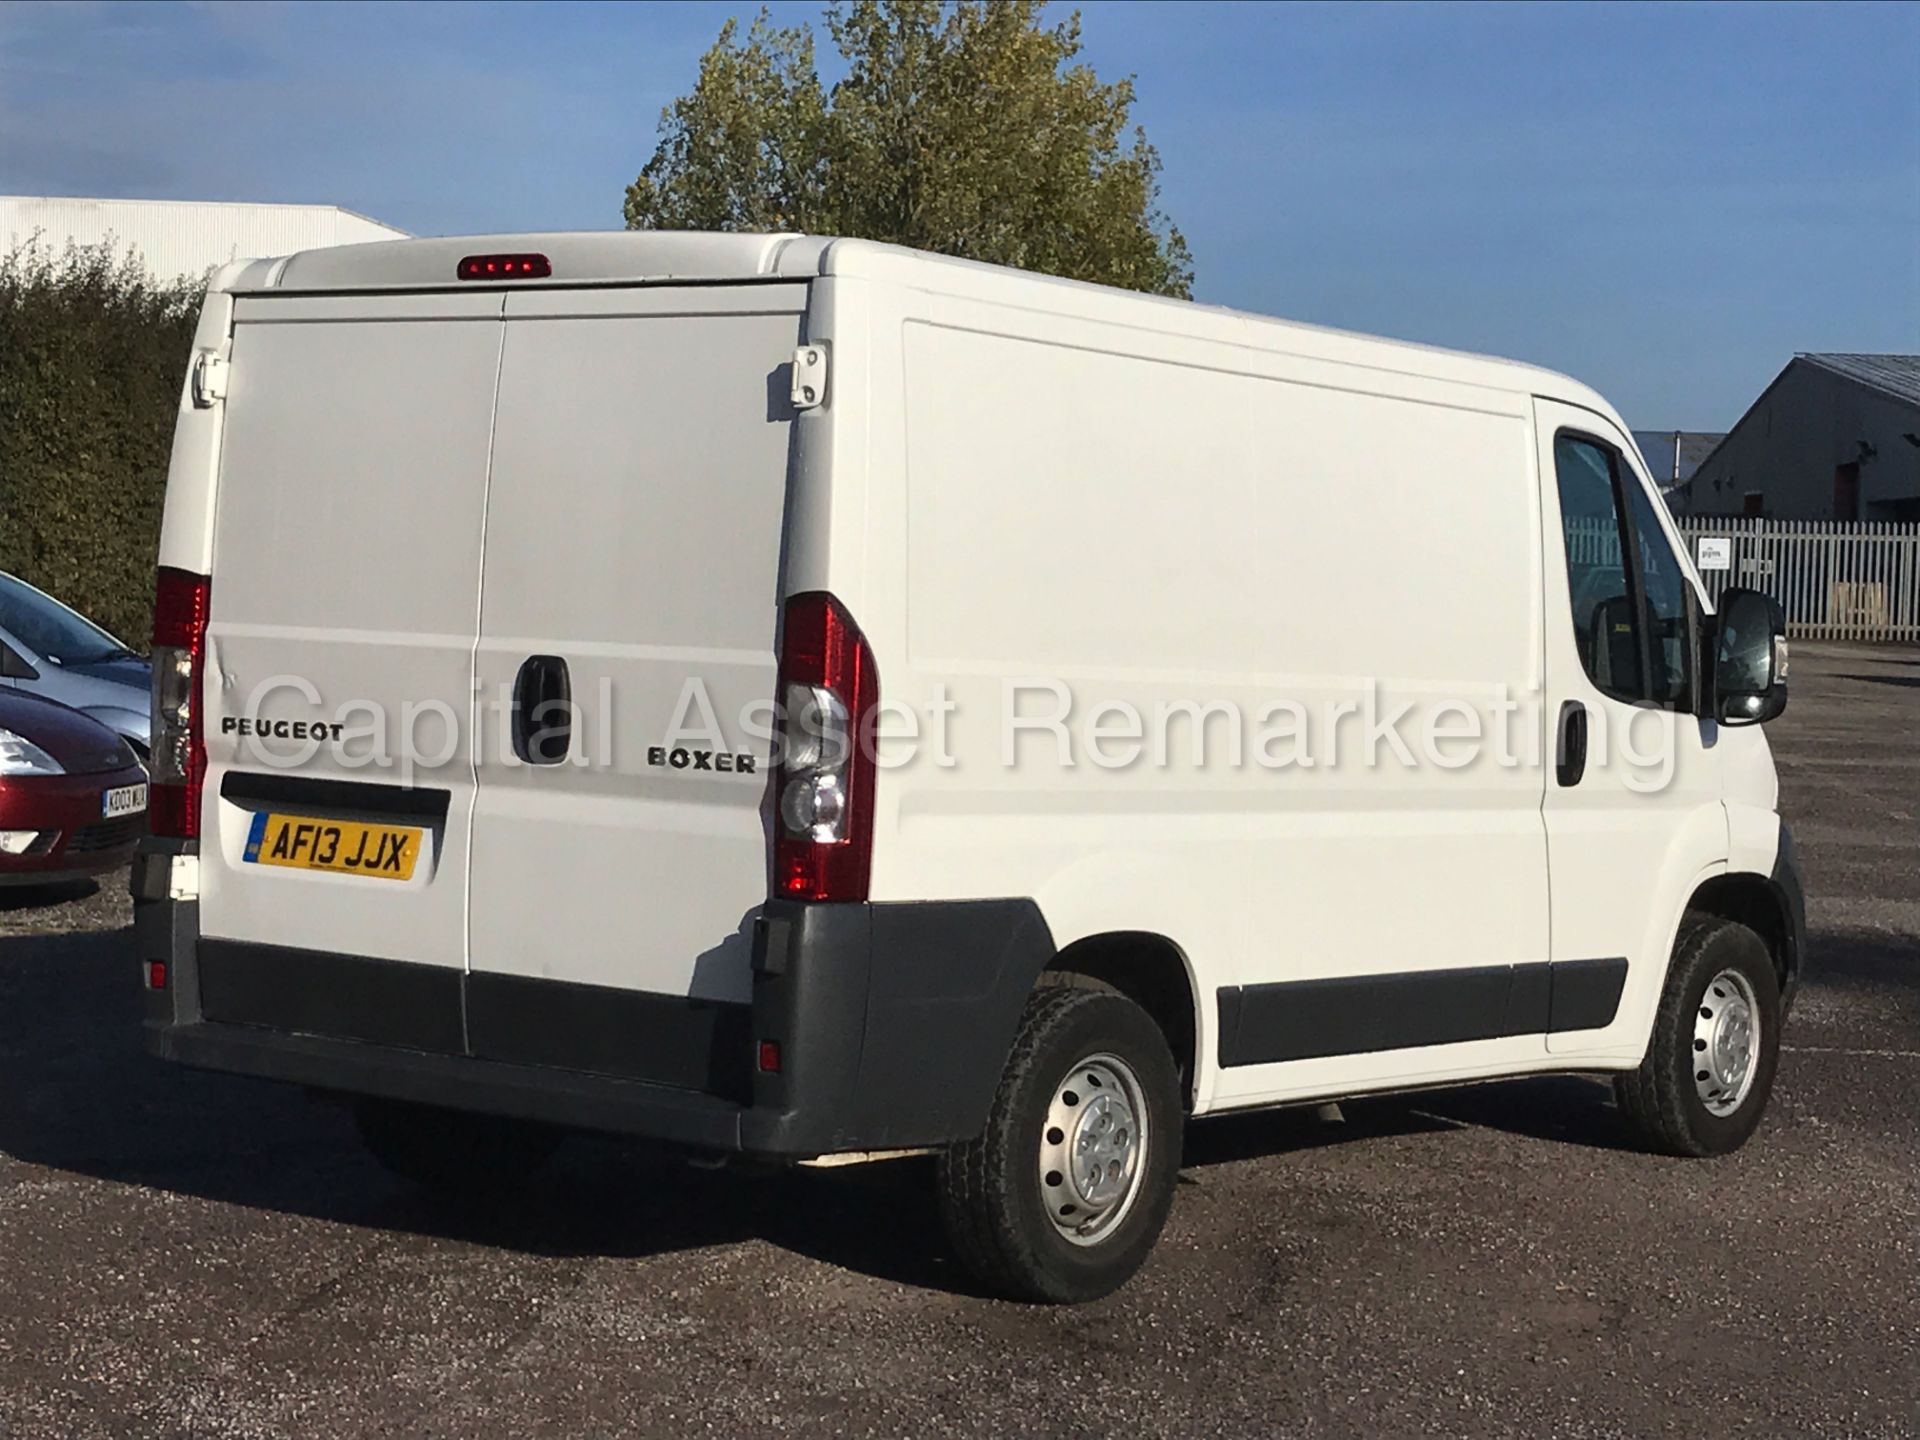 PEUGEOT BOXER 330 L1H1 (2013 - 13 REG) 'SWB - 2.2 HDI - 6 SPEED' (1 OWNER FROM NEW) **LOW MILES** - Image 8 of 19